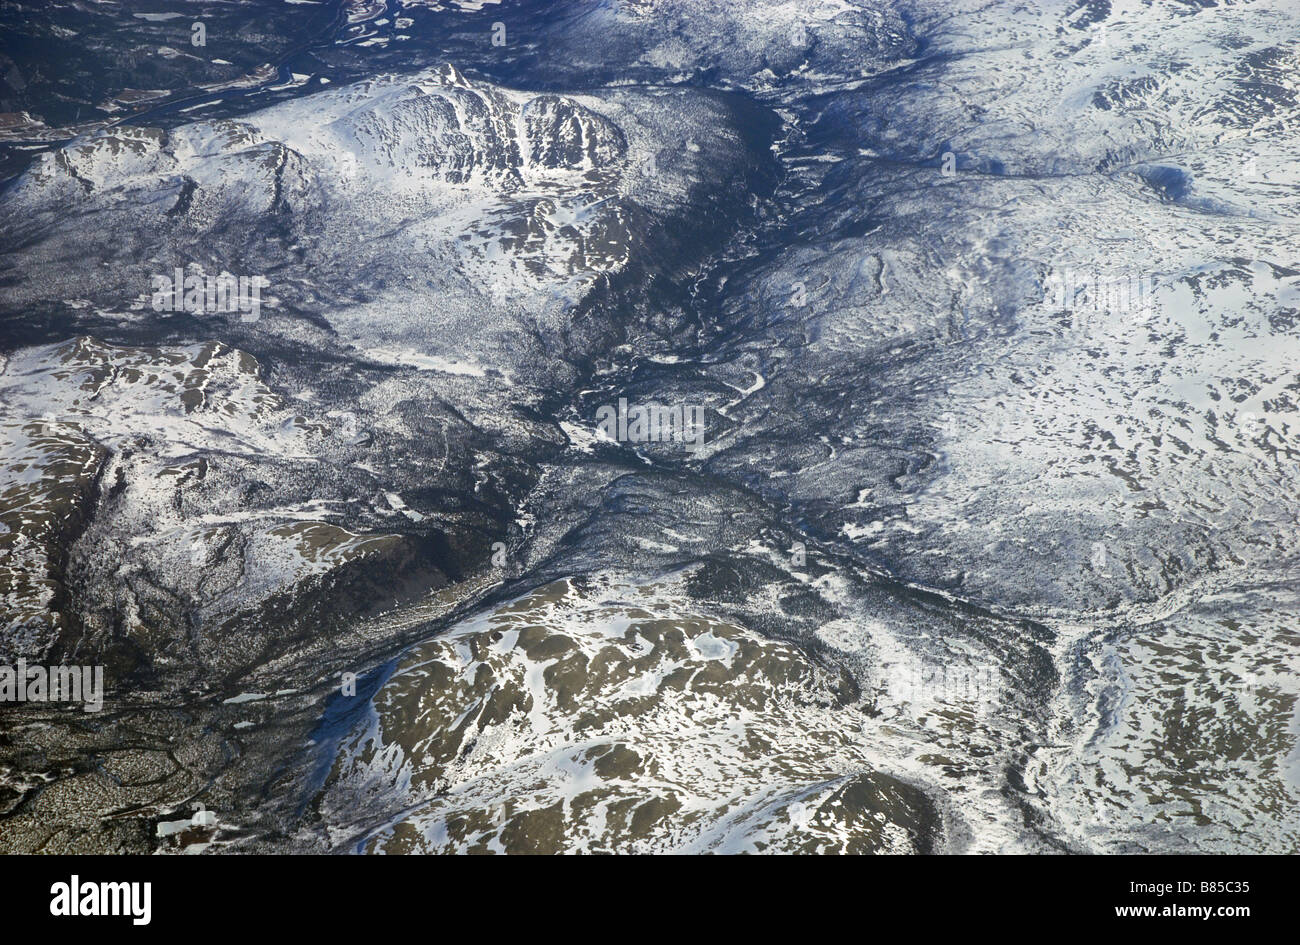 Norwegian mountain landscape seen from the air Stock Photo